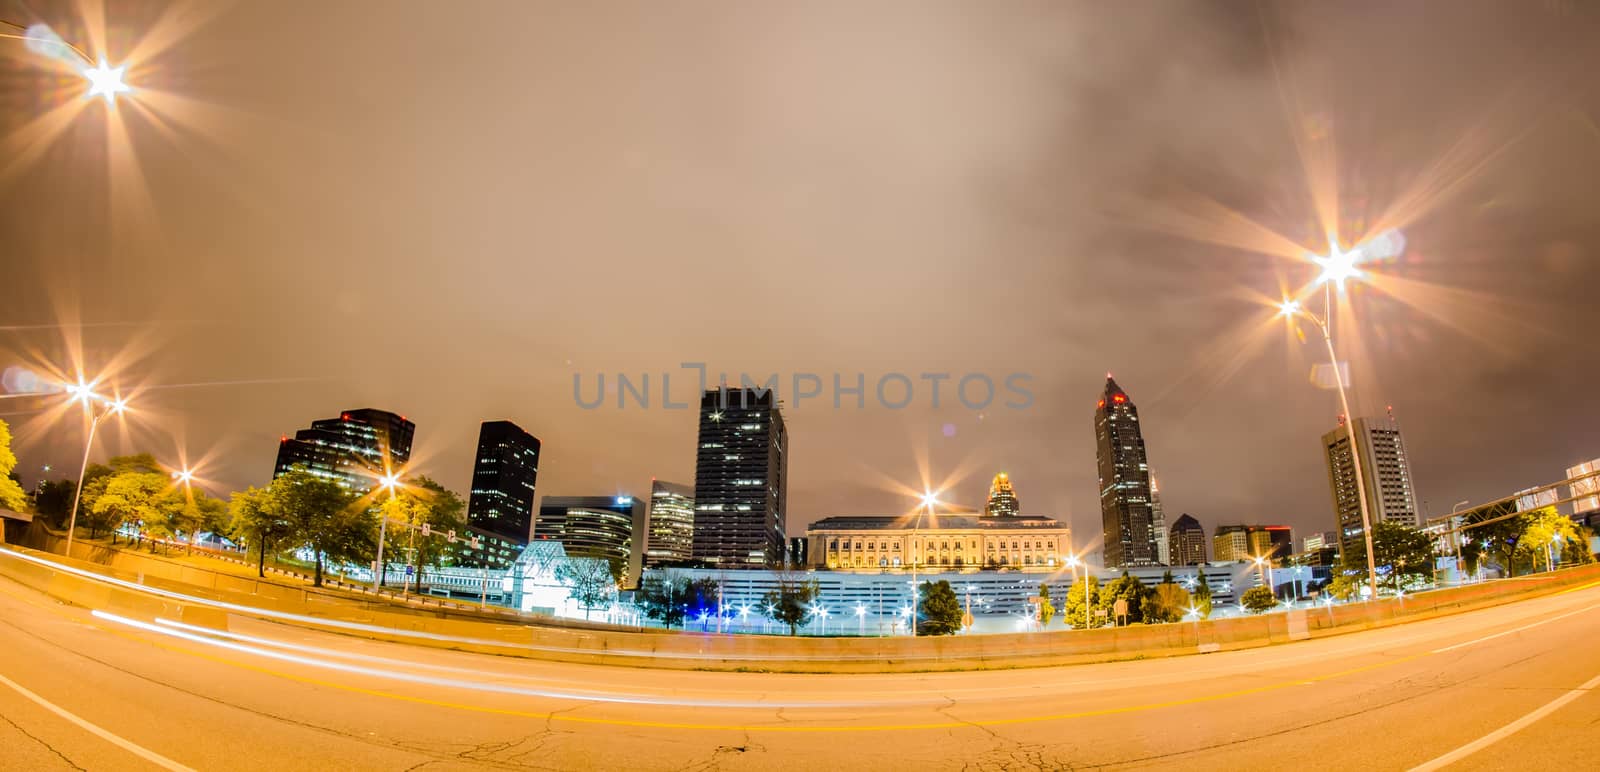 Cleveland downtown on cloudy day by digidreamgrafix